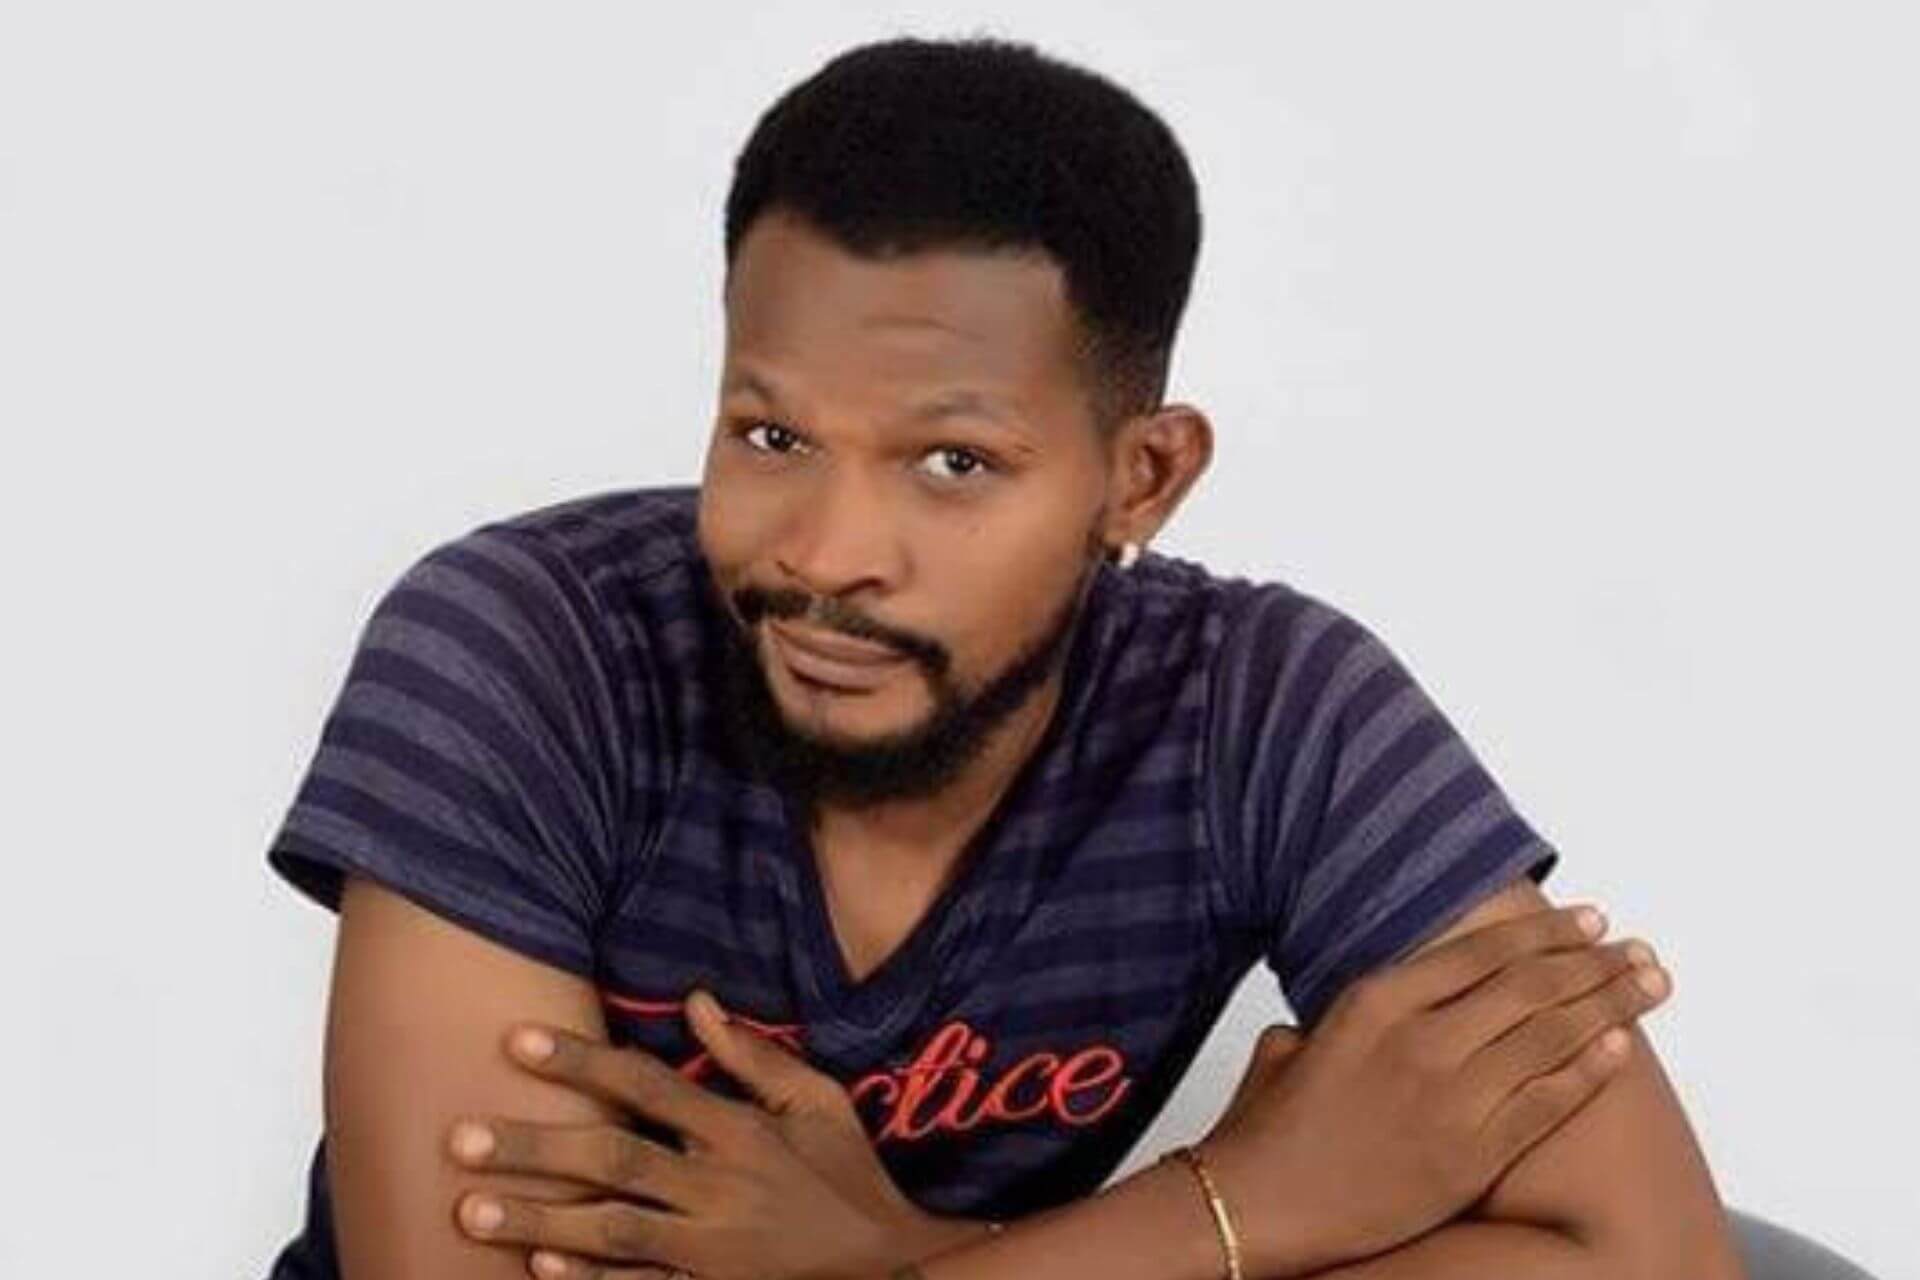 Nollywood actor, Uche Maduagwu says he was raped by a male actor